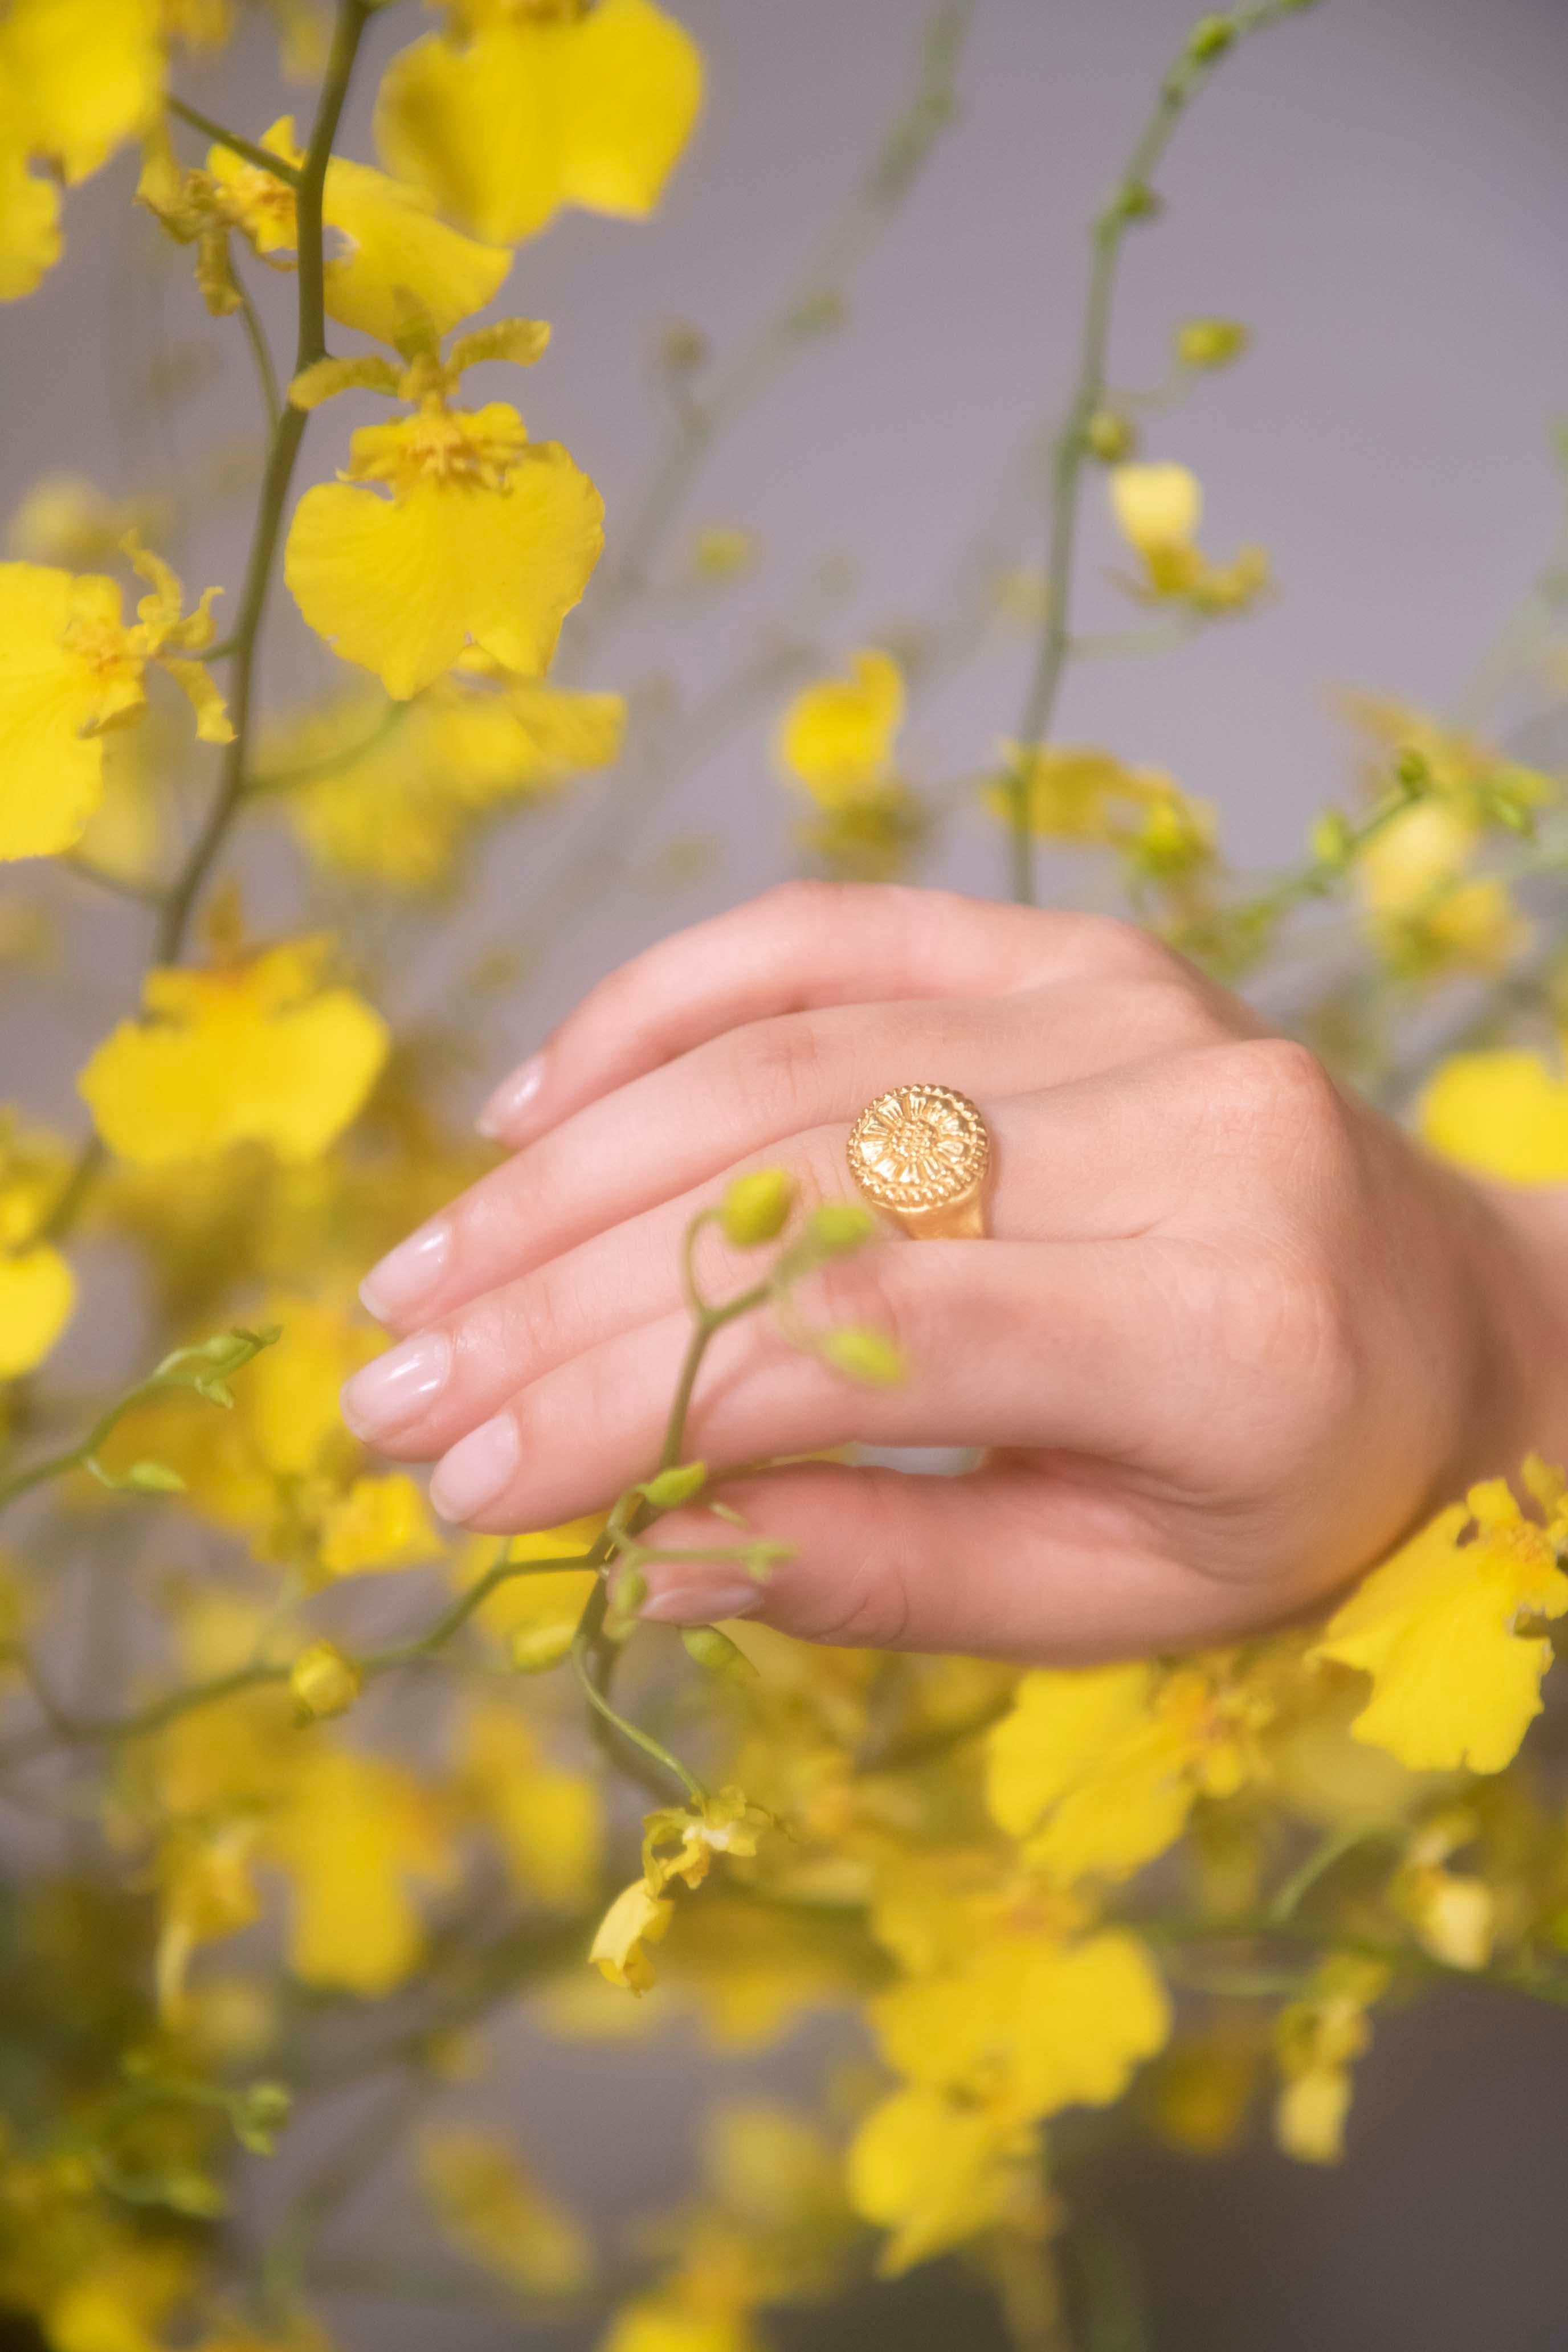 The Ellis Ring is a heavy, completely solid rustic signet-style ring, a true flowerbomb on your finger, cast in a buttery warm 22k gold.

This ring is hand carved from wax by Rosa de Weerd and cast by her local foundry in Amsterdam. The shoulders